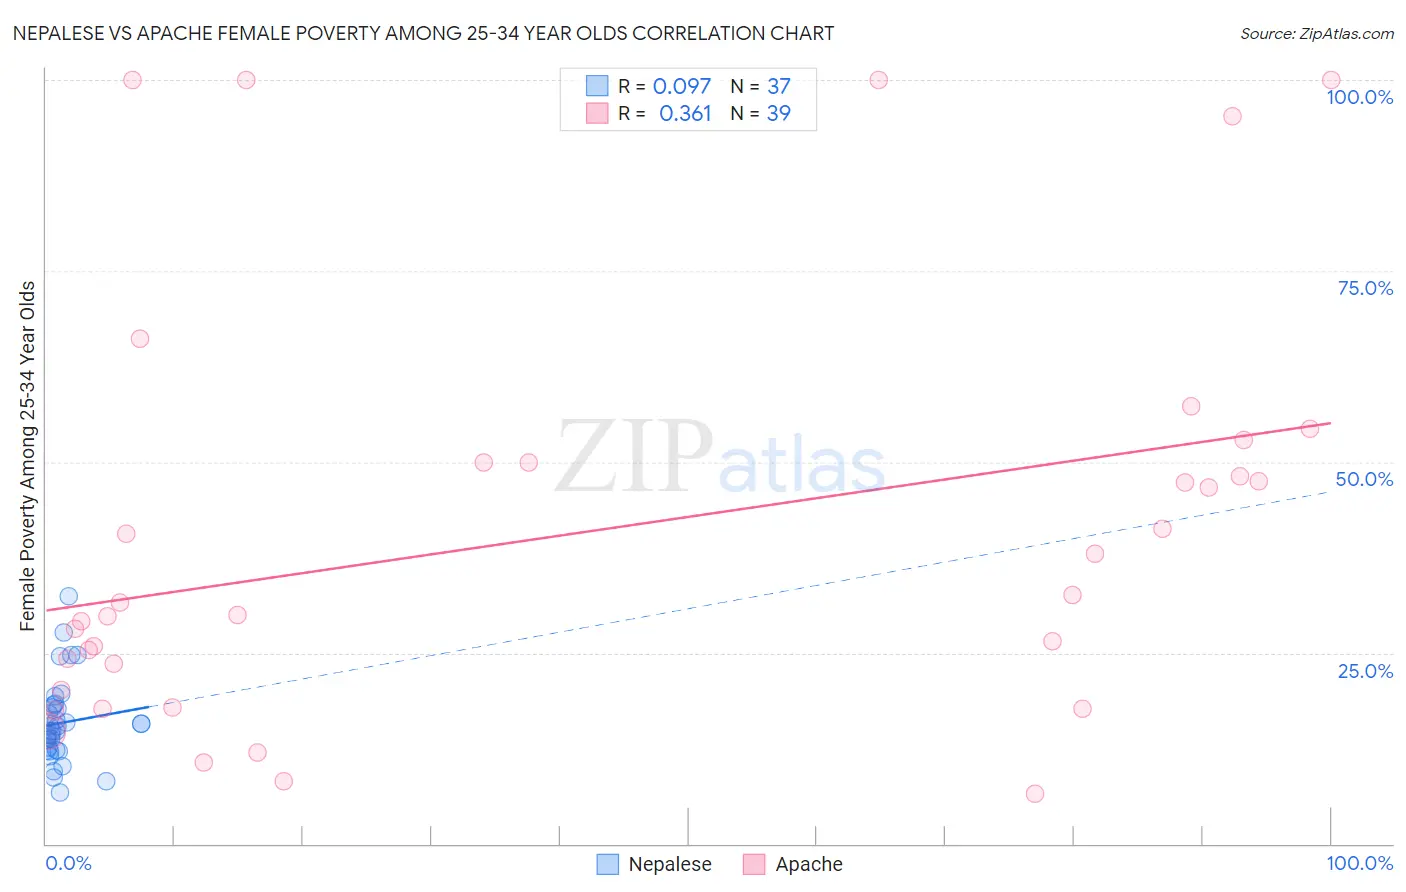 Nepalese vs Apache Female Poverty Among 25-34 Year Olds